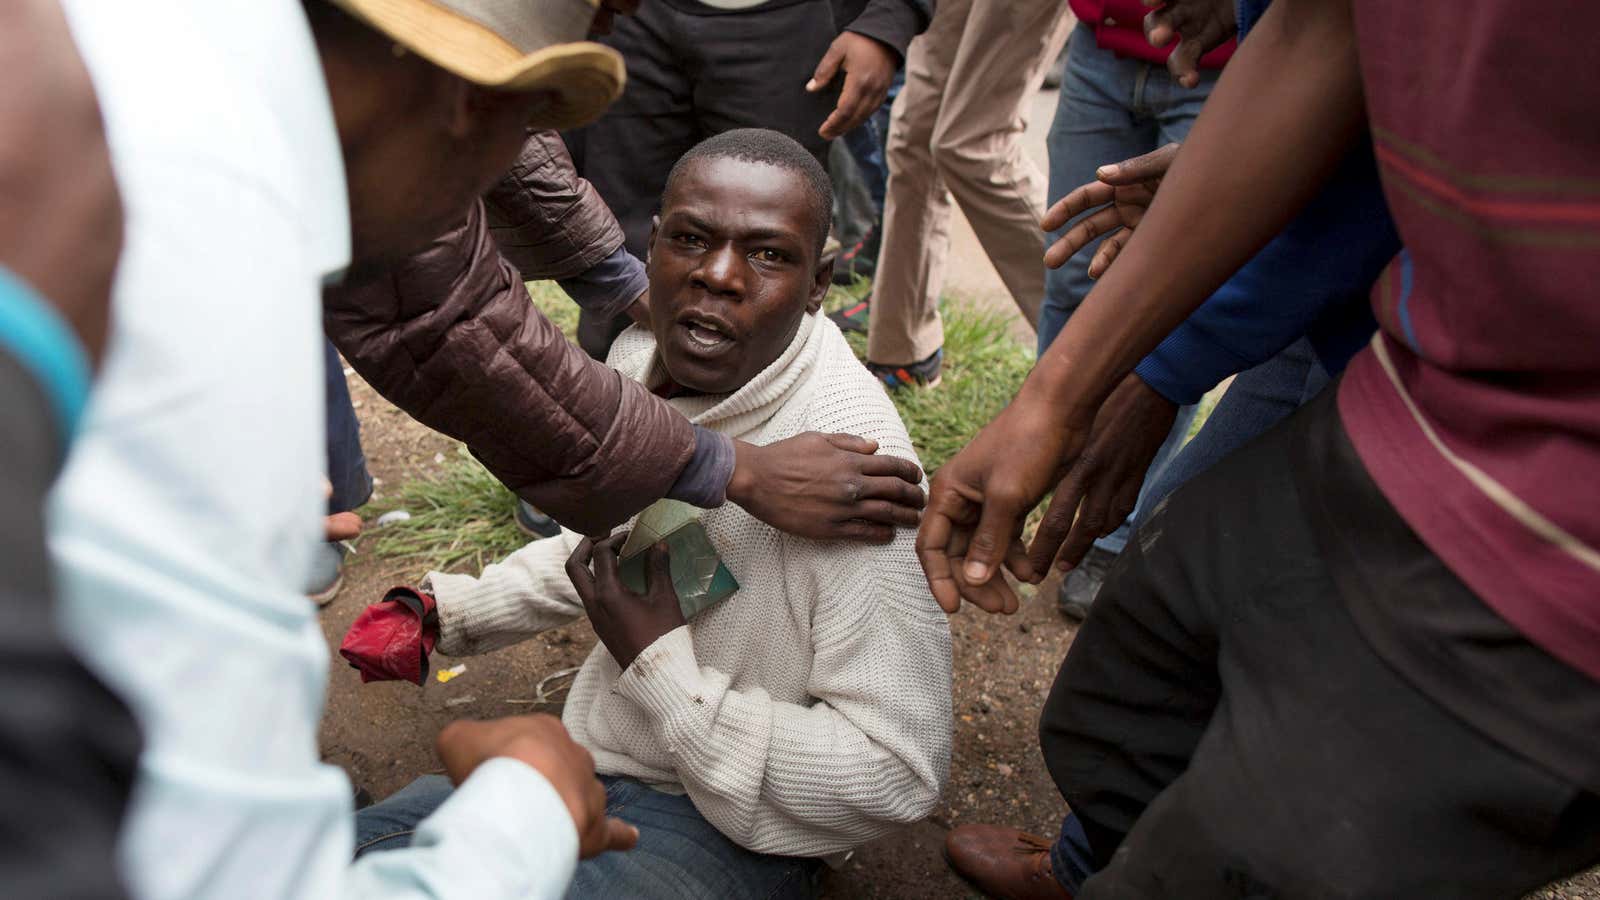 A  man holds his South African identity document after being attacked by a xenophobic mob in Pretoria, South Africa, February 24, 2017.